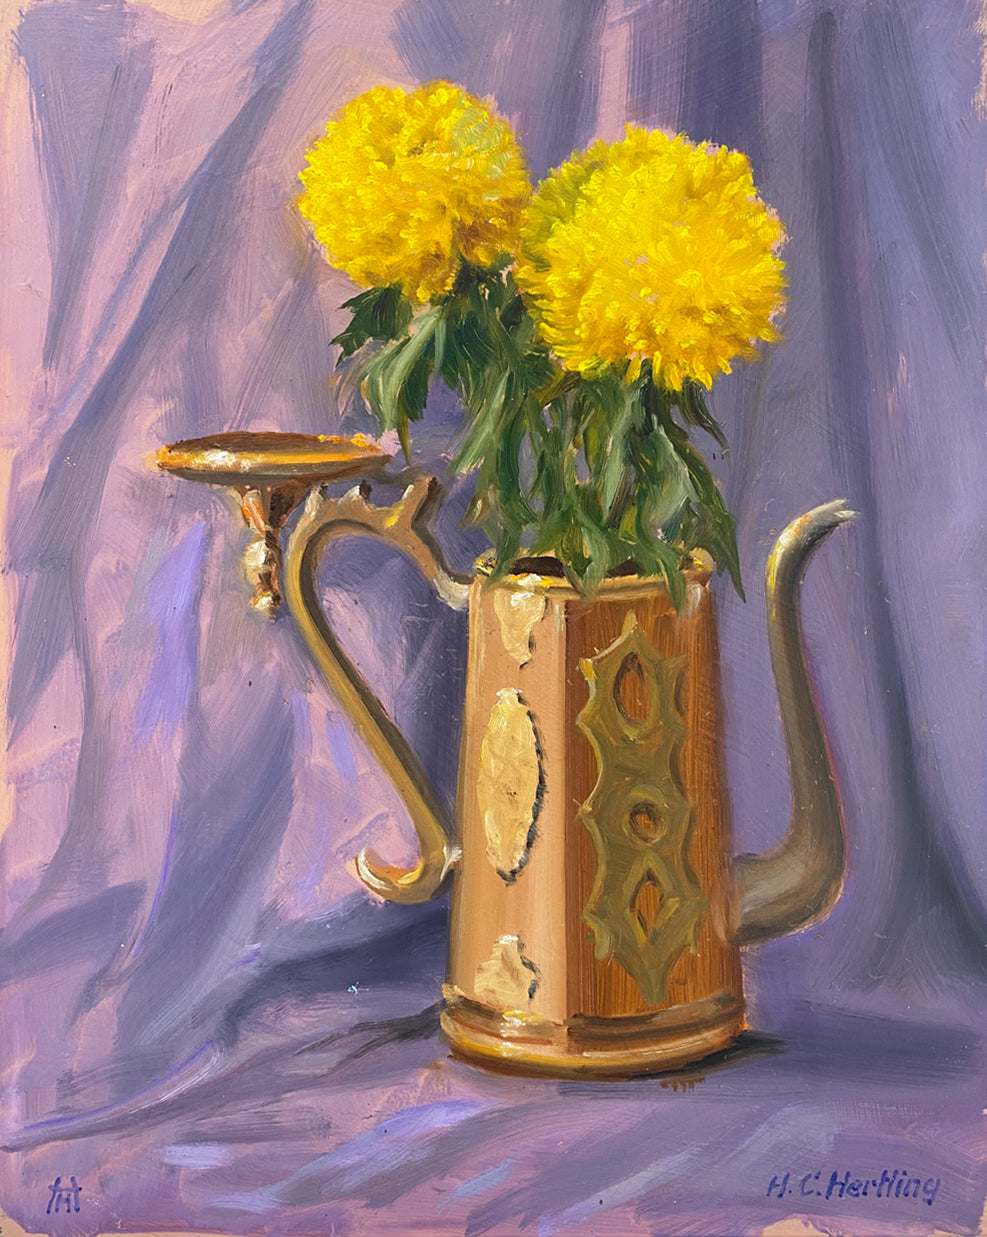 Flowers in a Teapot. Still life painting by Heiner Hertling.  Oil on board.  